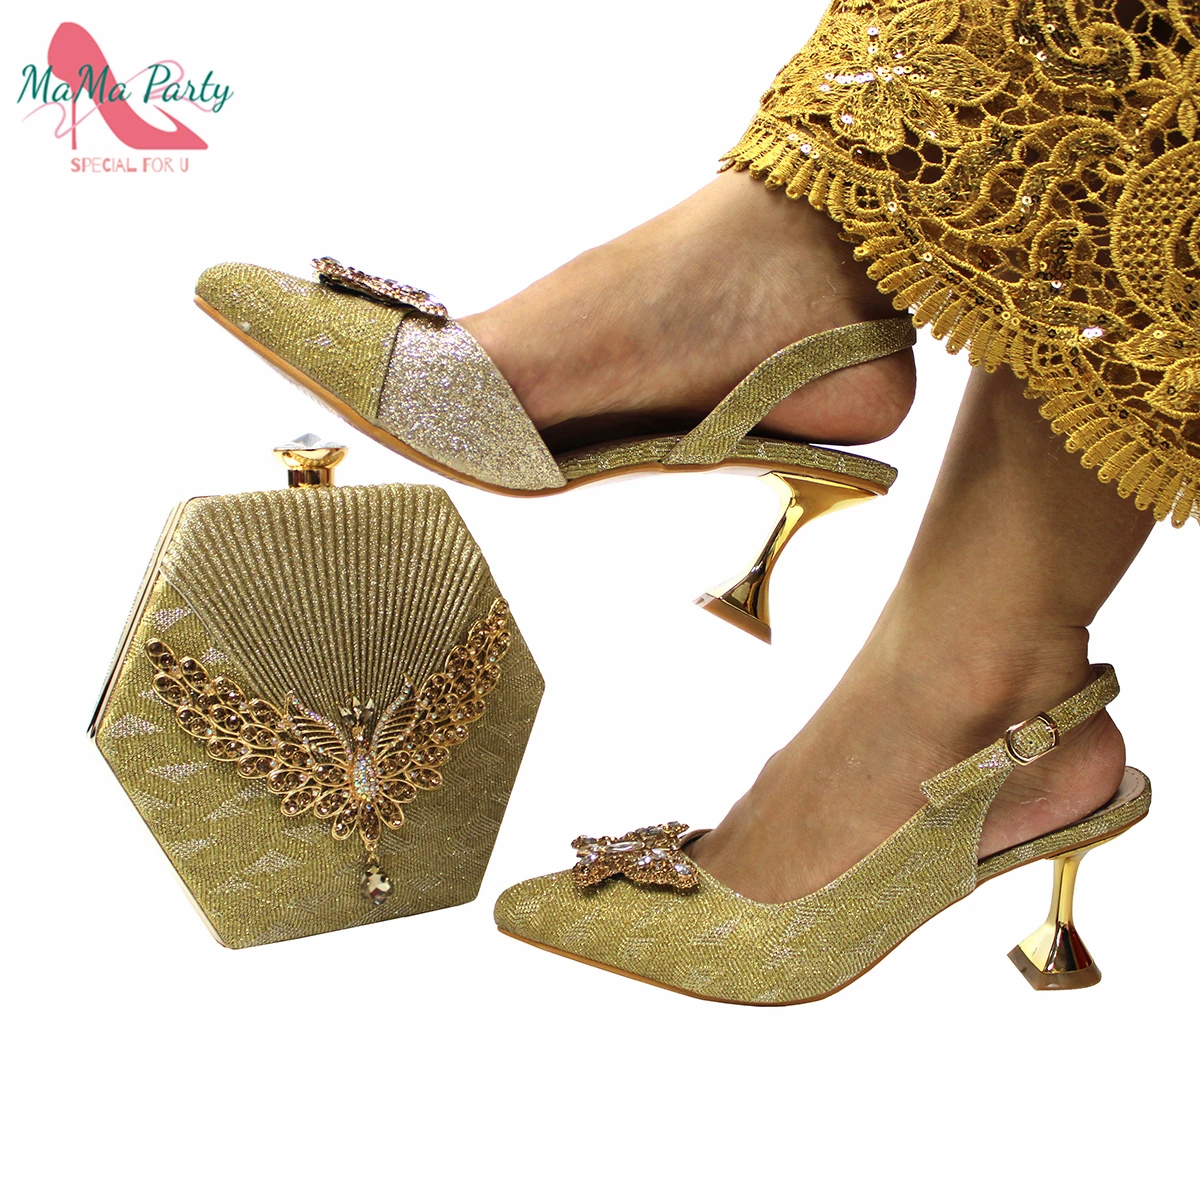 

2021 Nigerian Mature Style Women Shoes Matching Bag in Golden Color Fashion New Design Classics Ladies Pumps